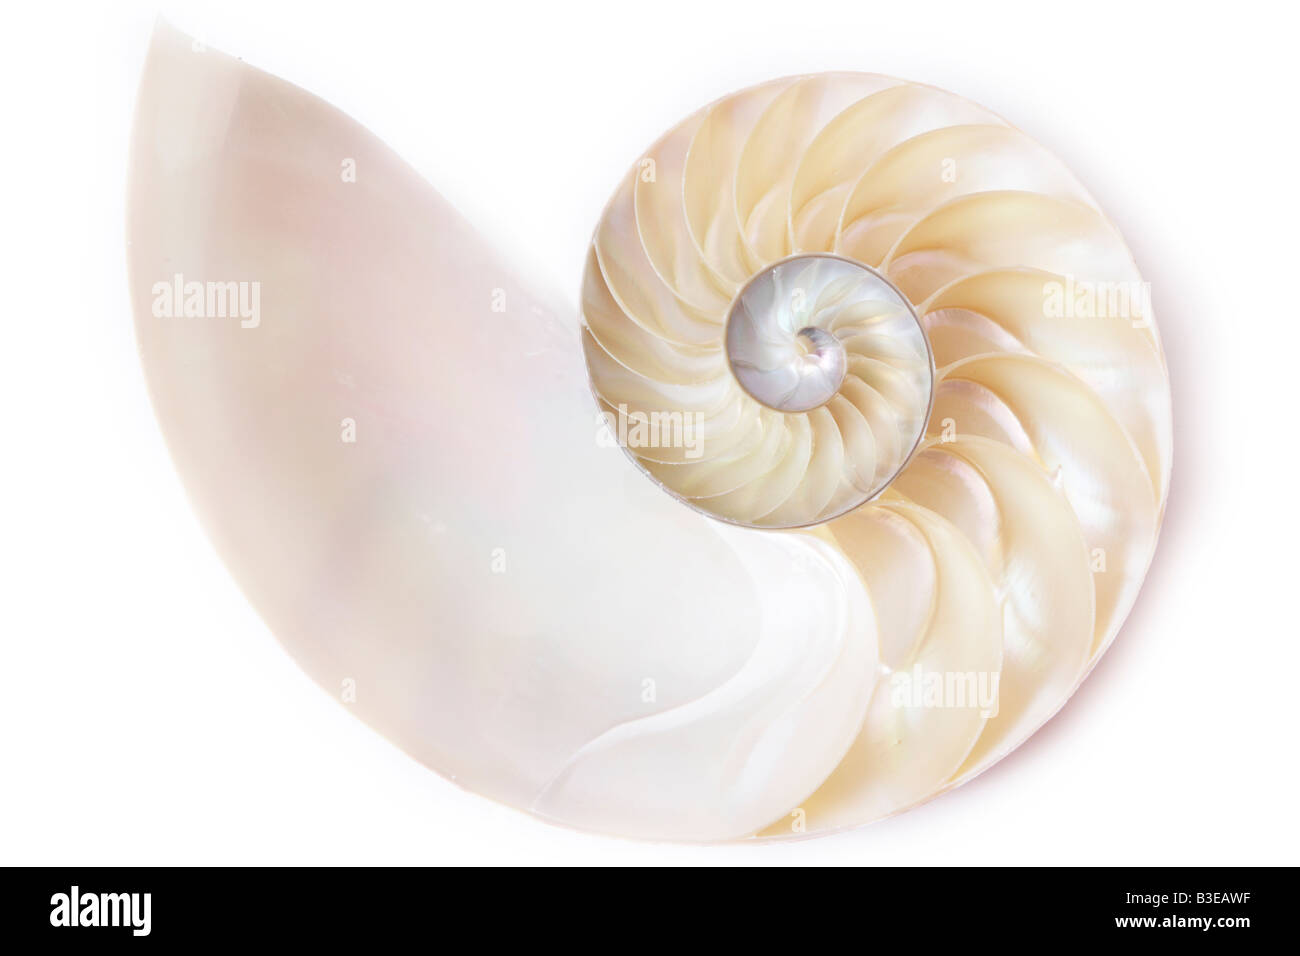 Stock Photo of the Inside of a Spiral Seashell Stock Photo